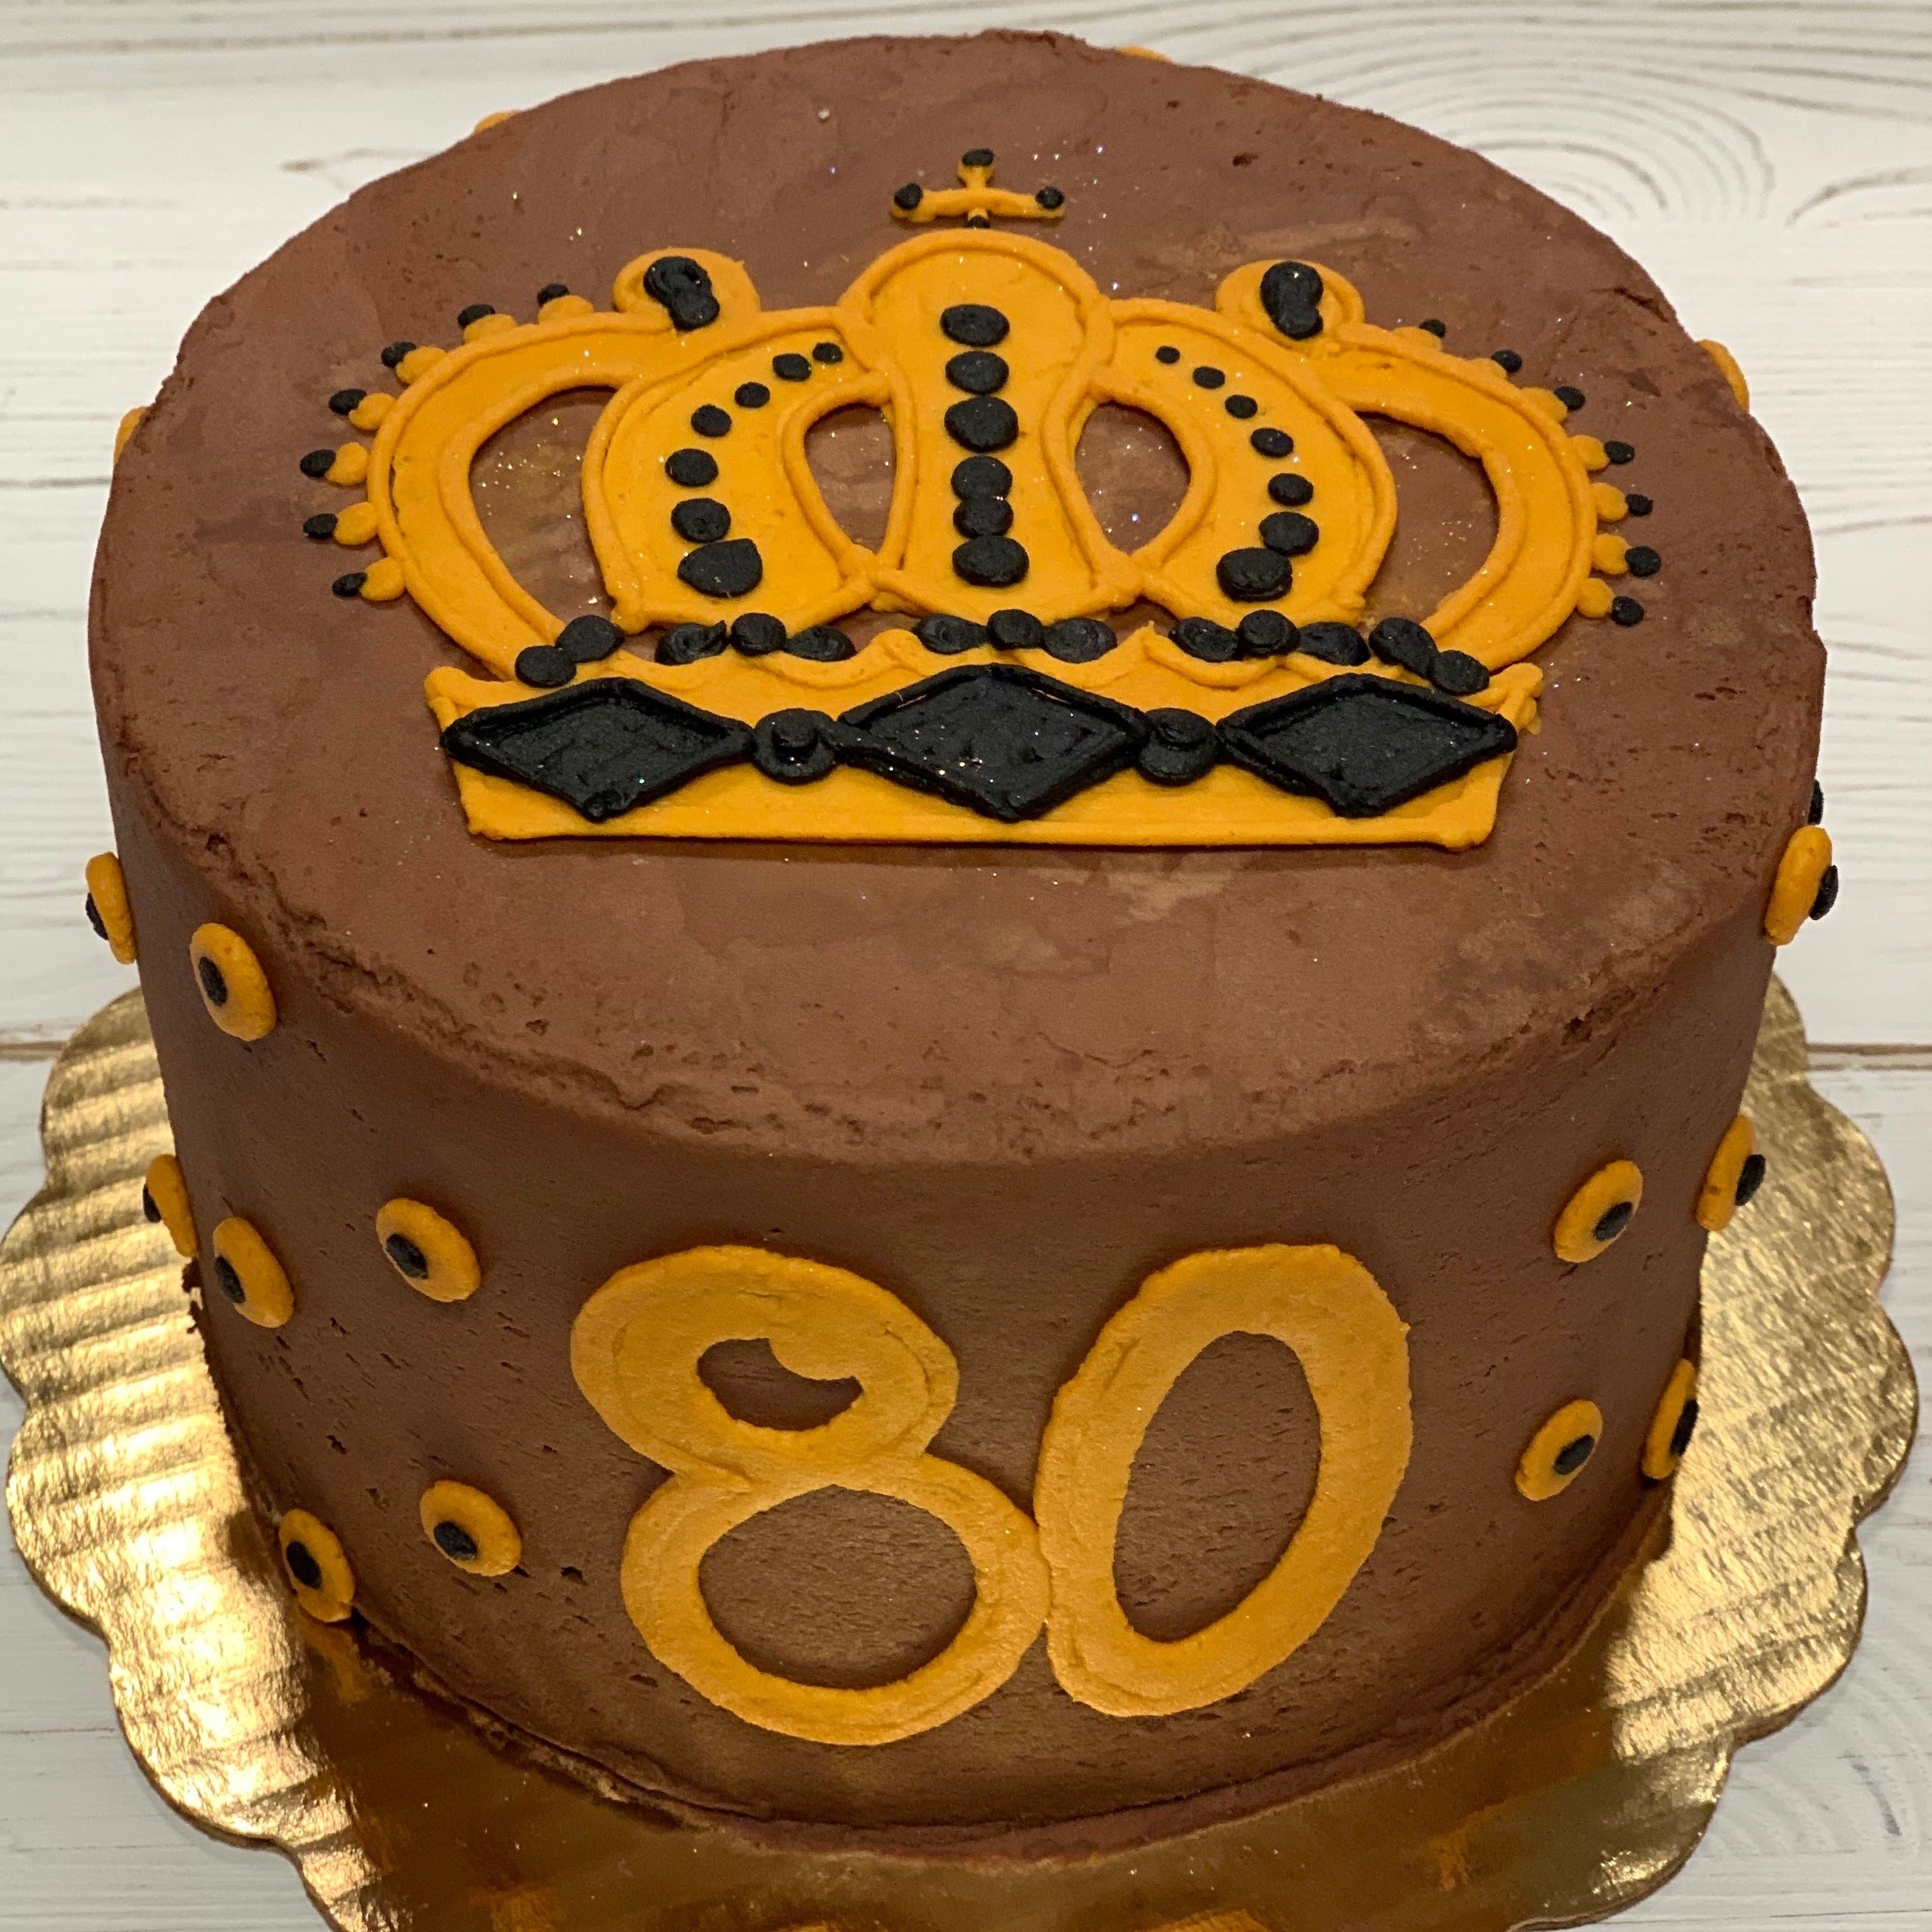 King Theme Cake available in low price